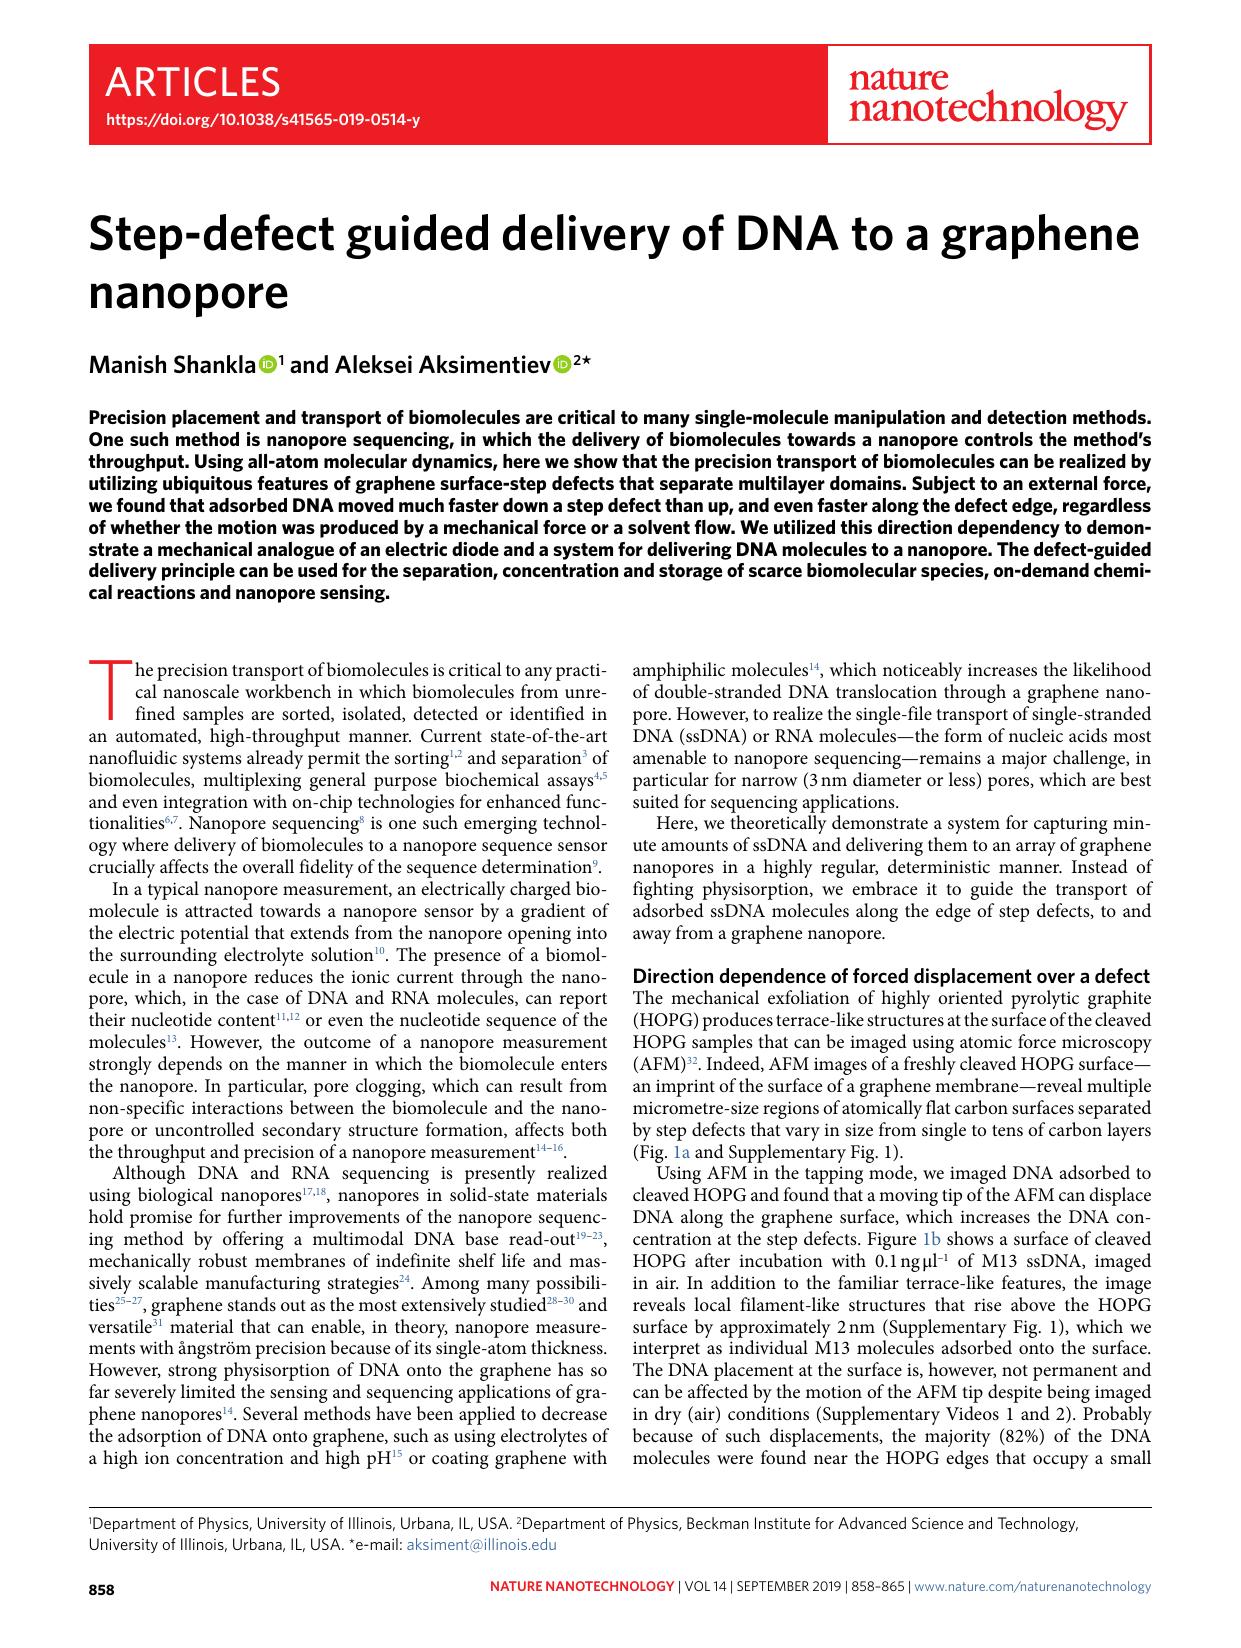 Step-defect guided delivery of DNA to a graphene nanopore by Manish Shankla & Aleksei Aksimentiev